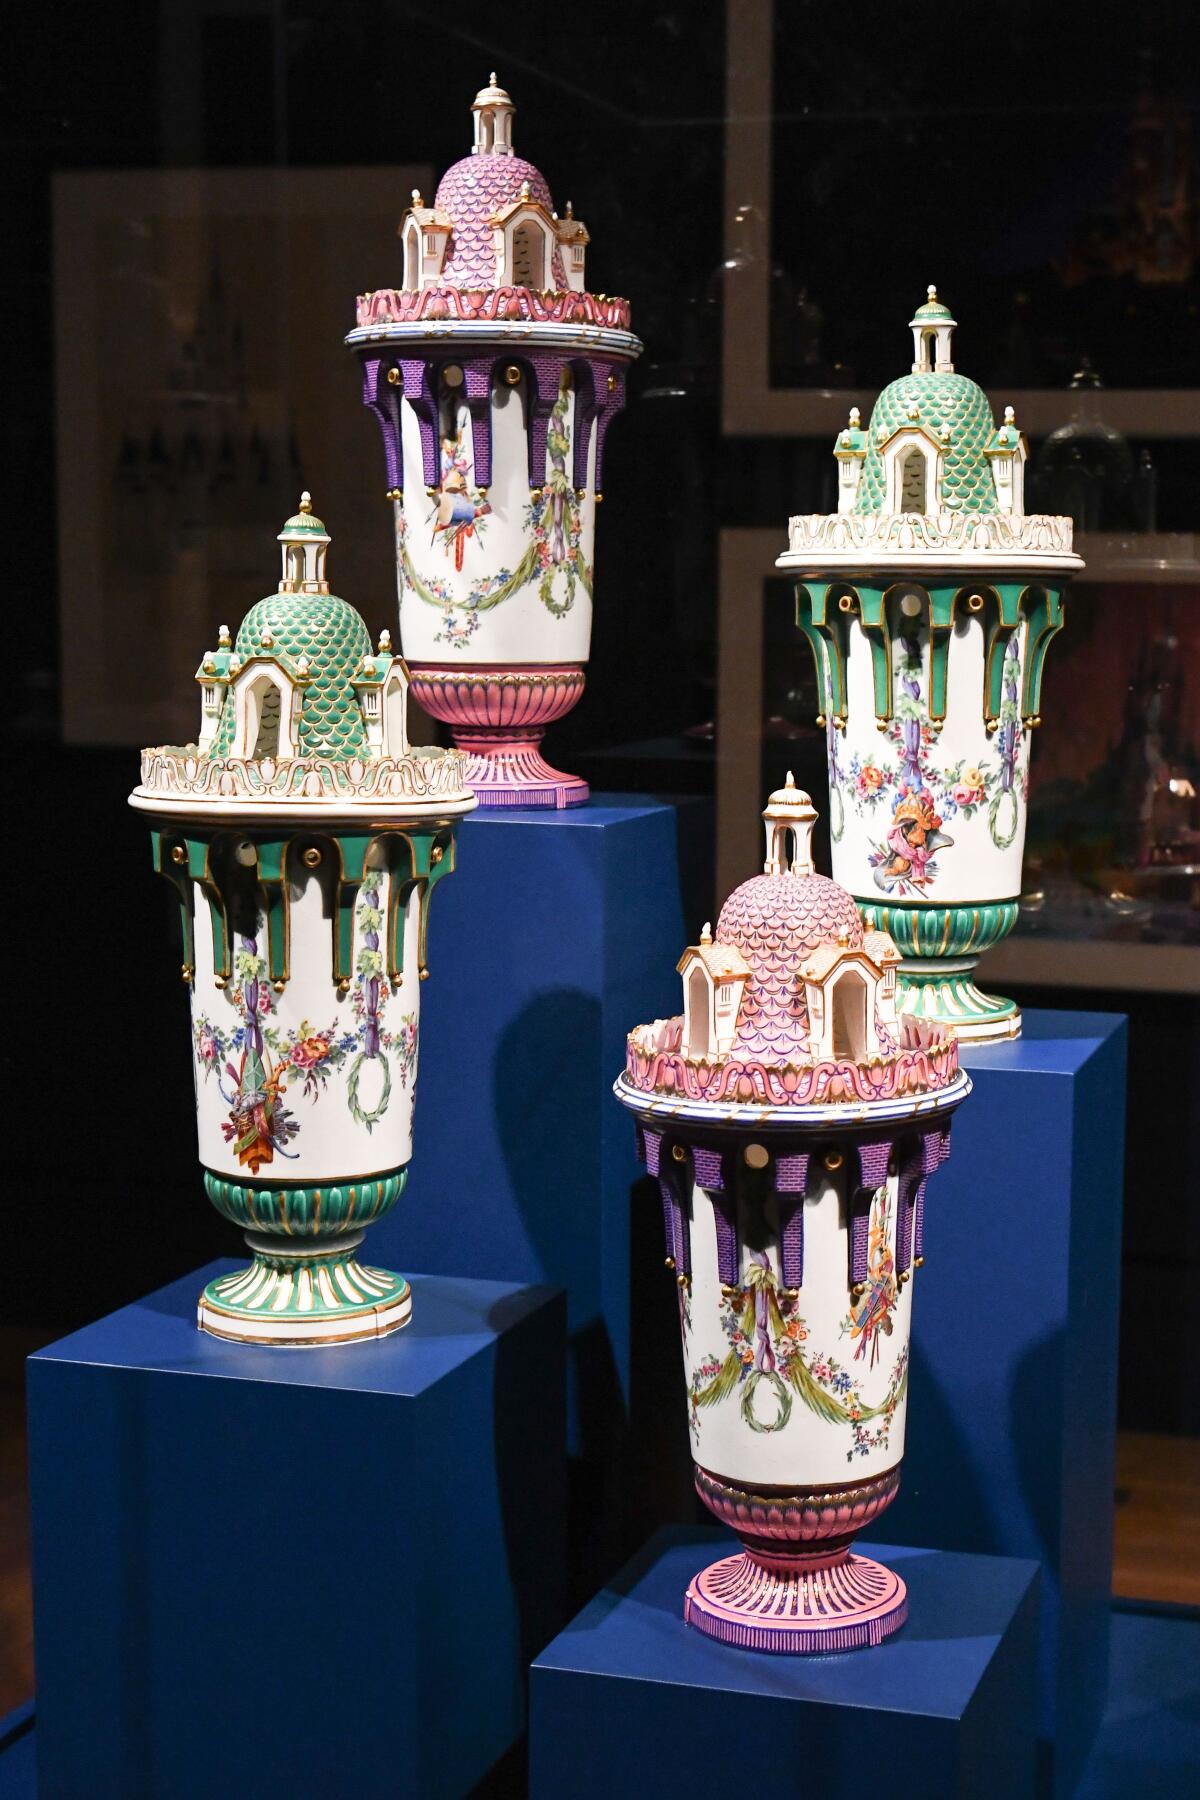 Ornate vases arranged on plinths are shown in candy shades of pink, purple and green.